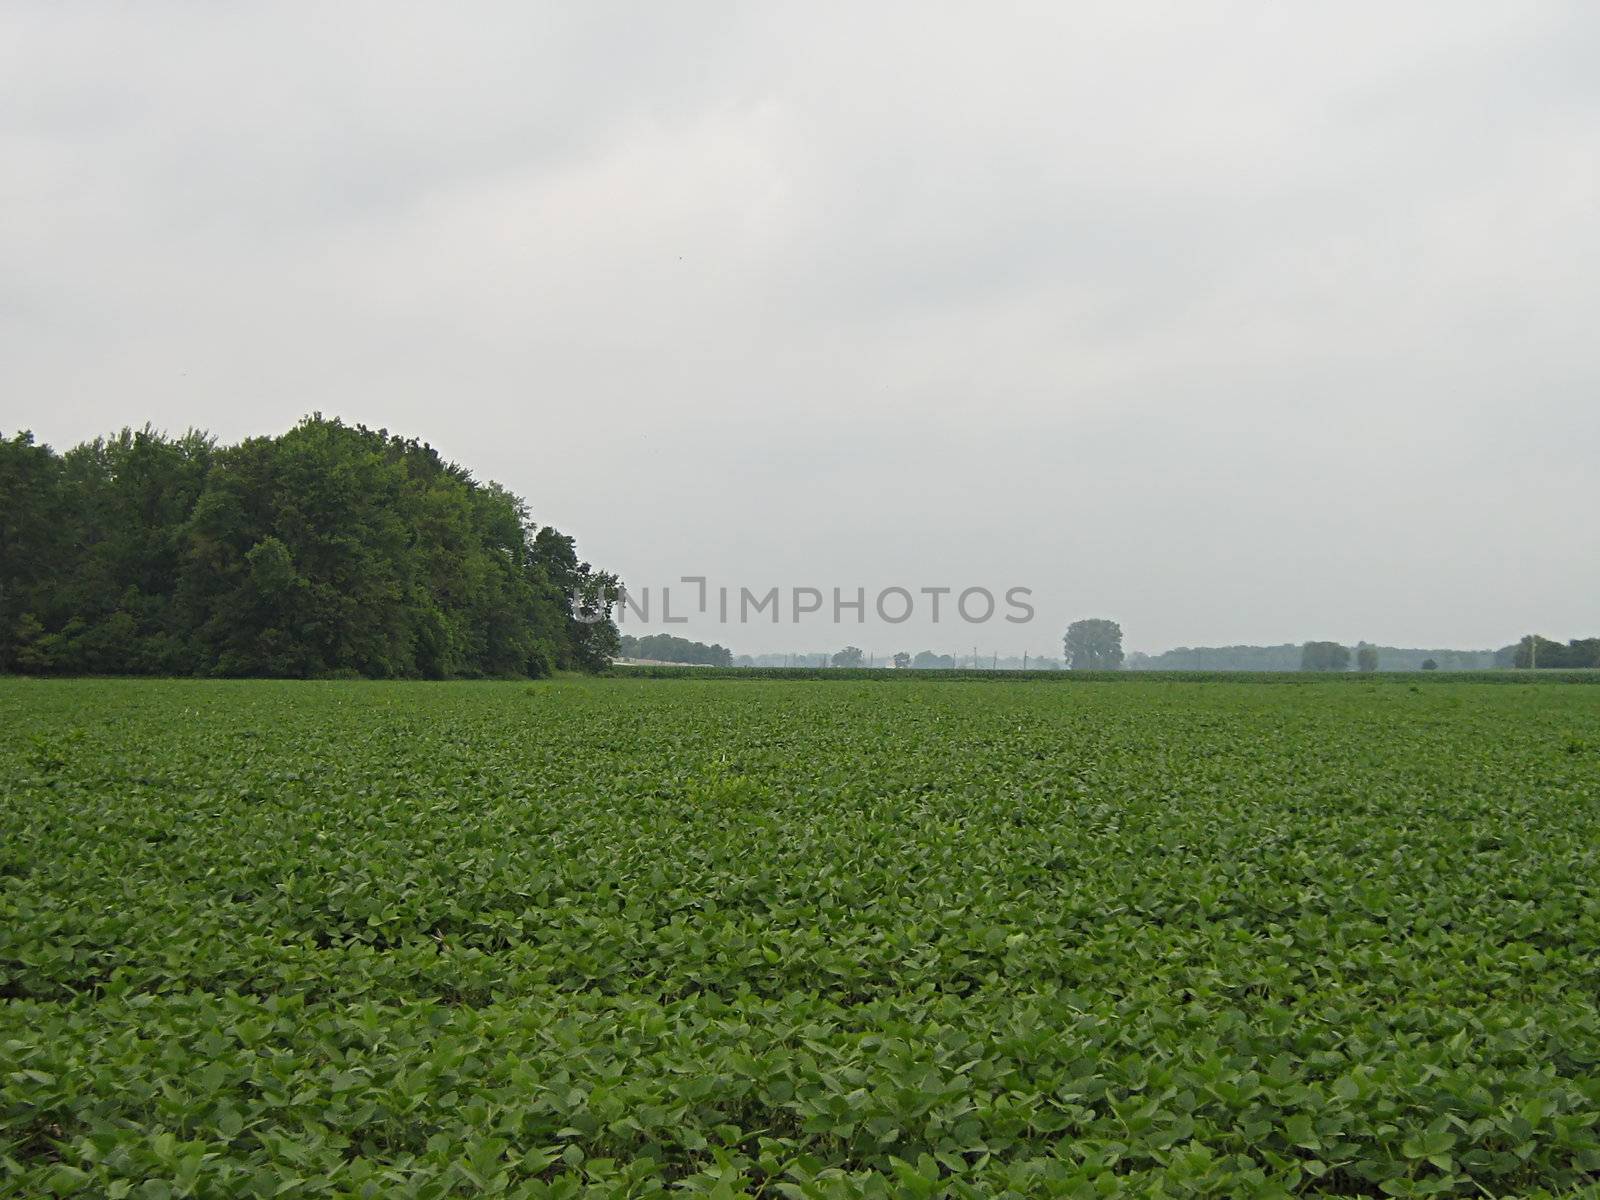 A photograph of a field of crops.